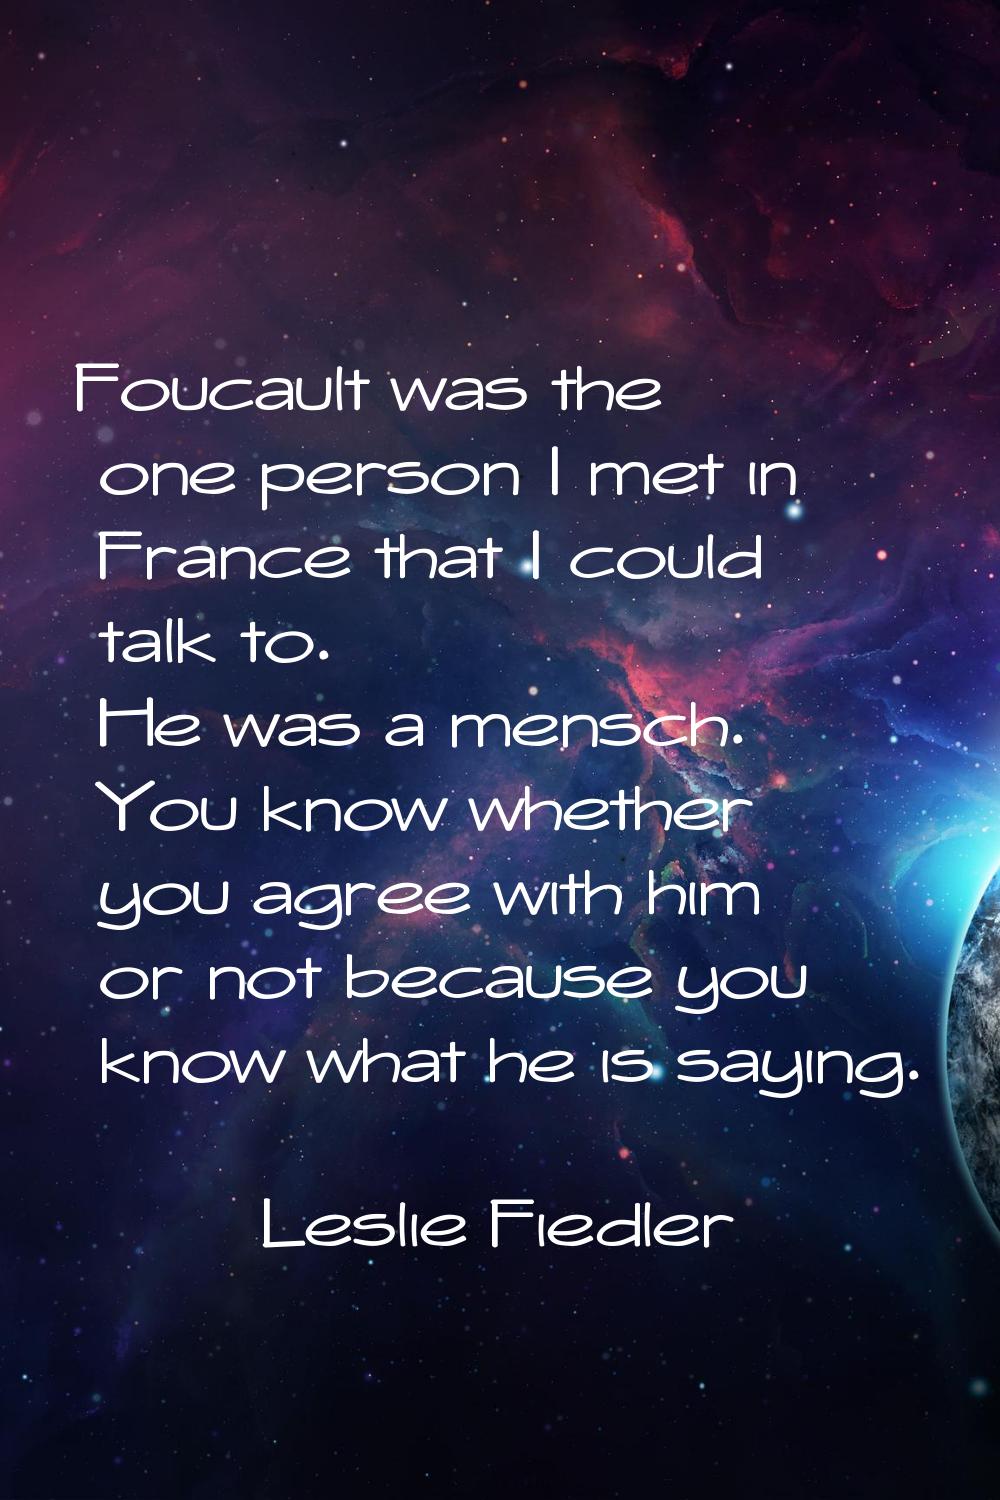 Foucault was the one person I met in France that I could talk to. He was a mensch. You know whether